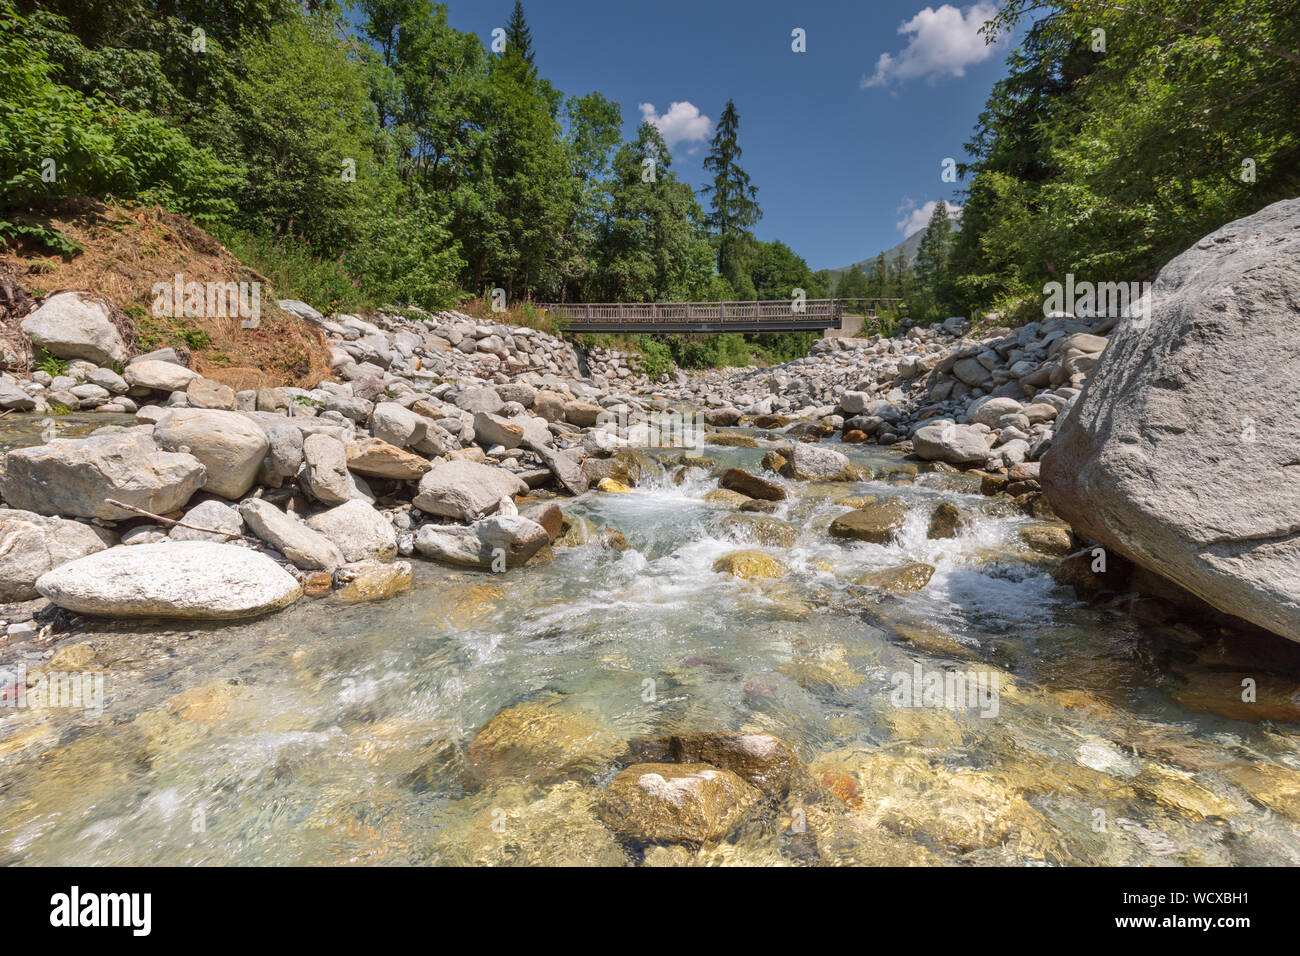 Footbrdge on the Balcon Sud over the River Arve near Montroc in the chamonix valley Stock Photo